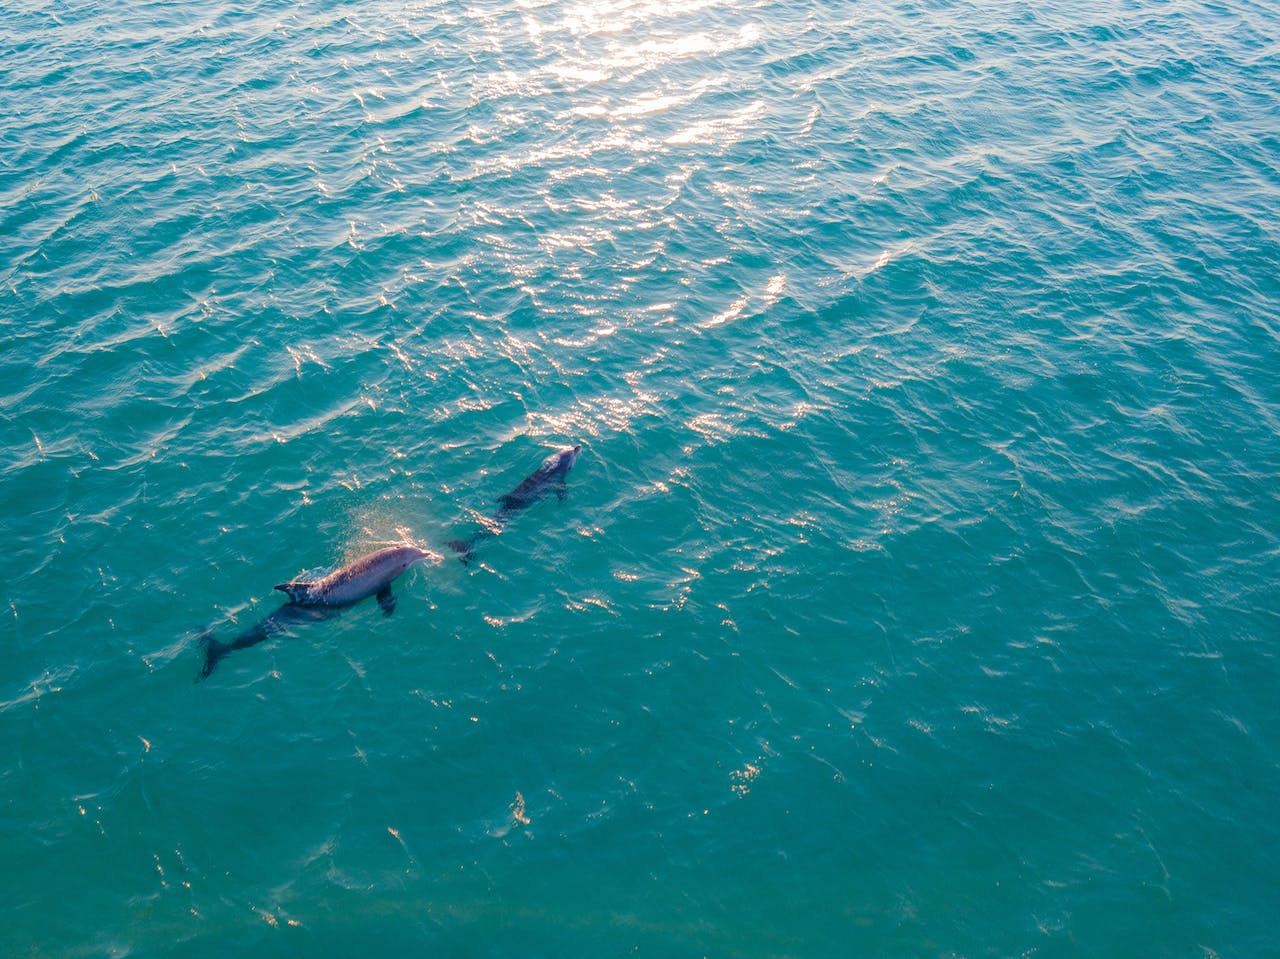 Two dolphins swimming in the ocean